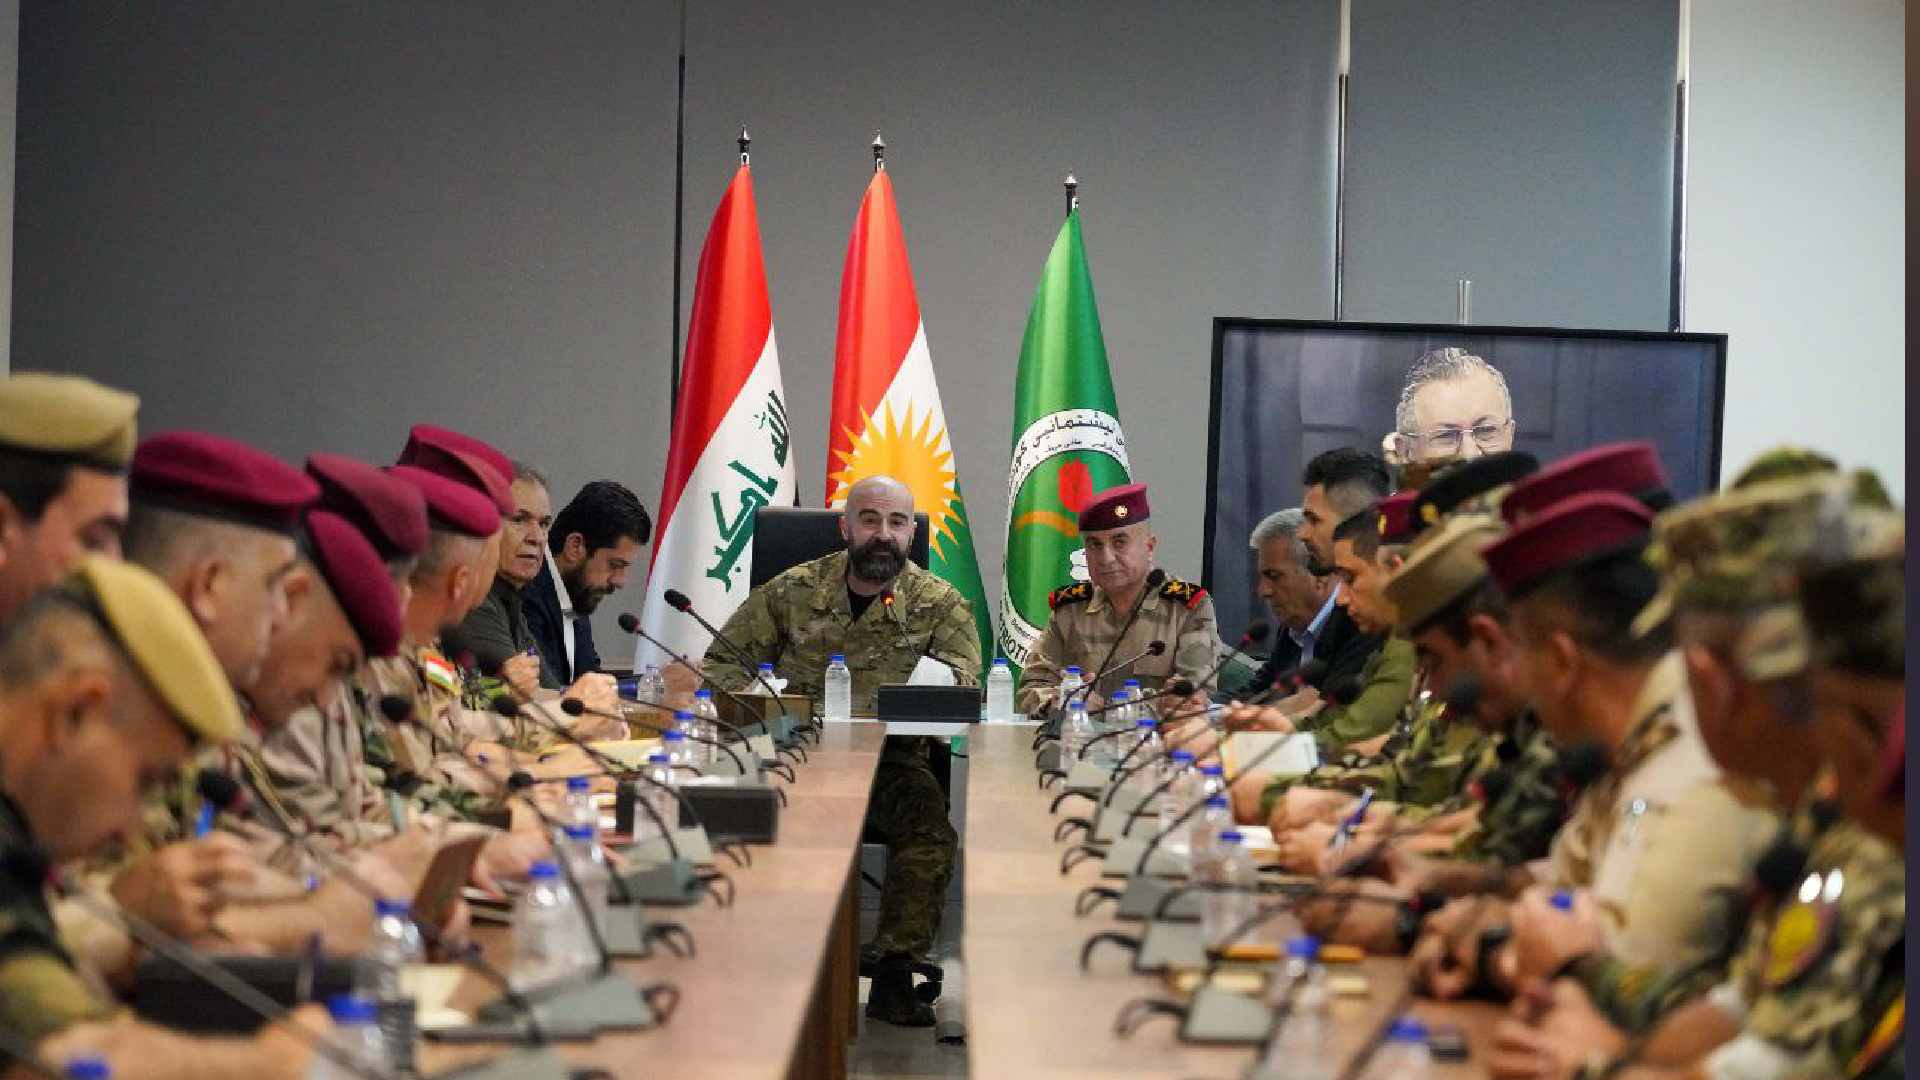  PUK President's meeting with a number of commanders and senior officers of the military units